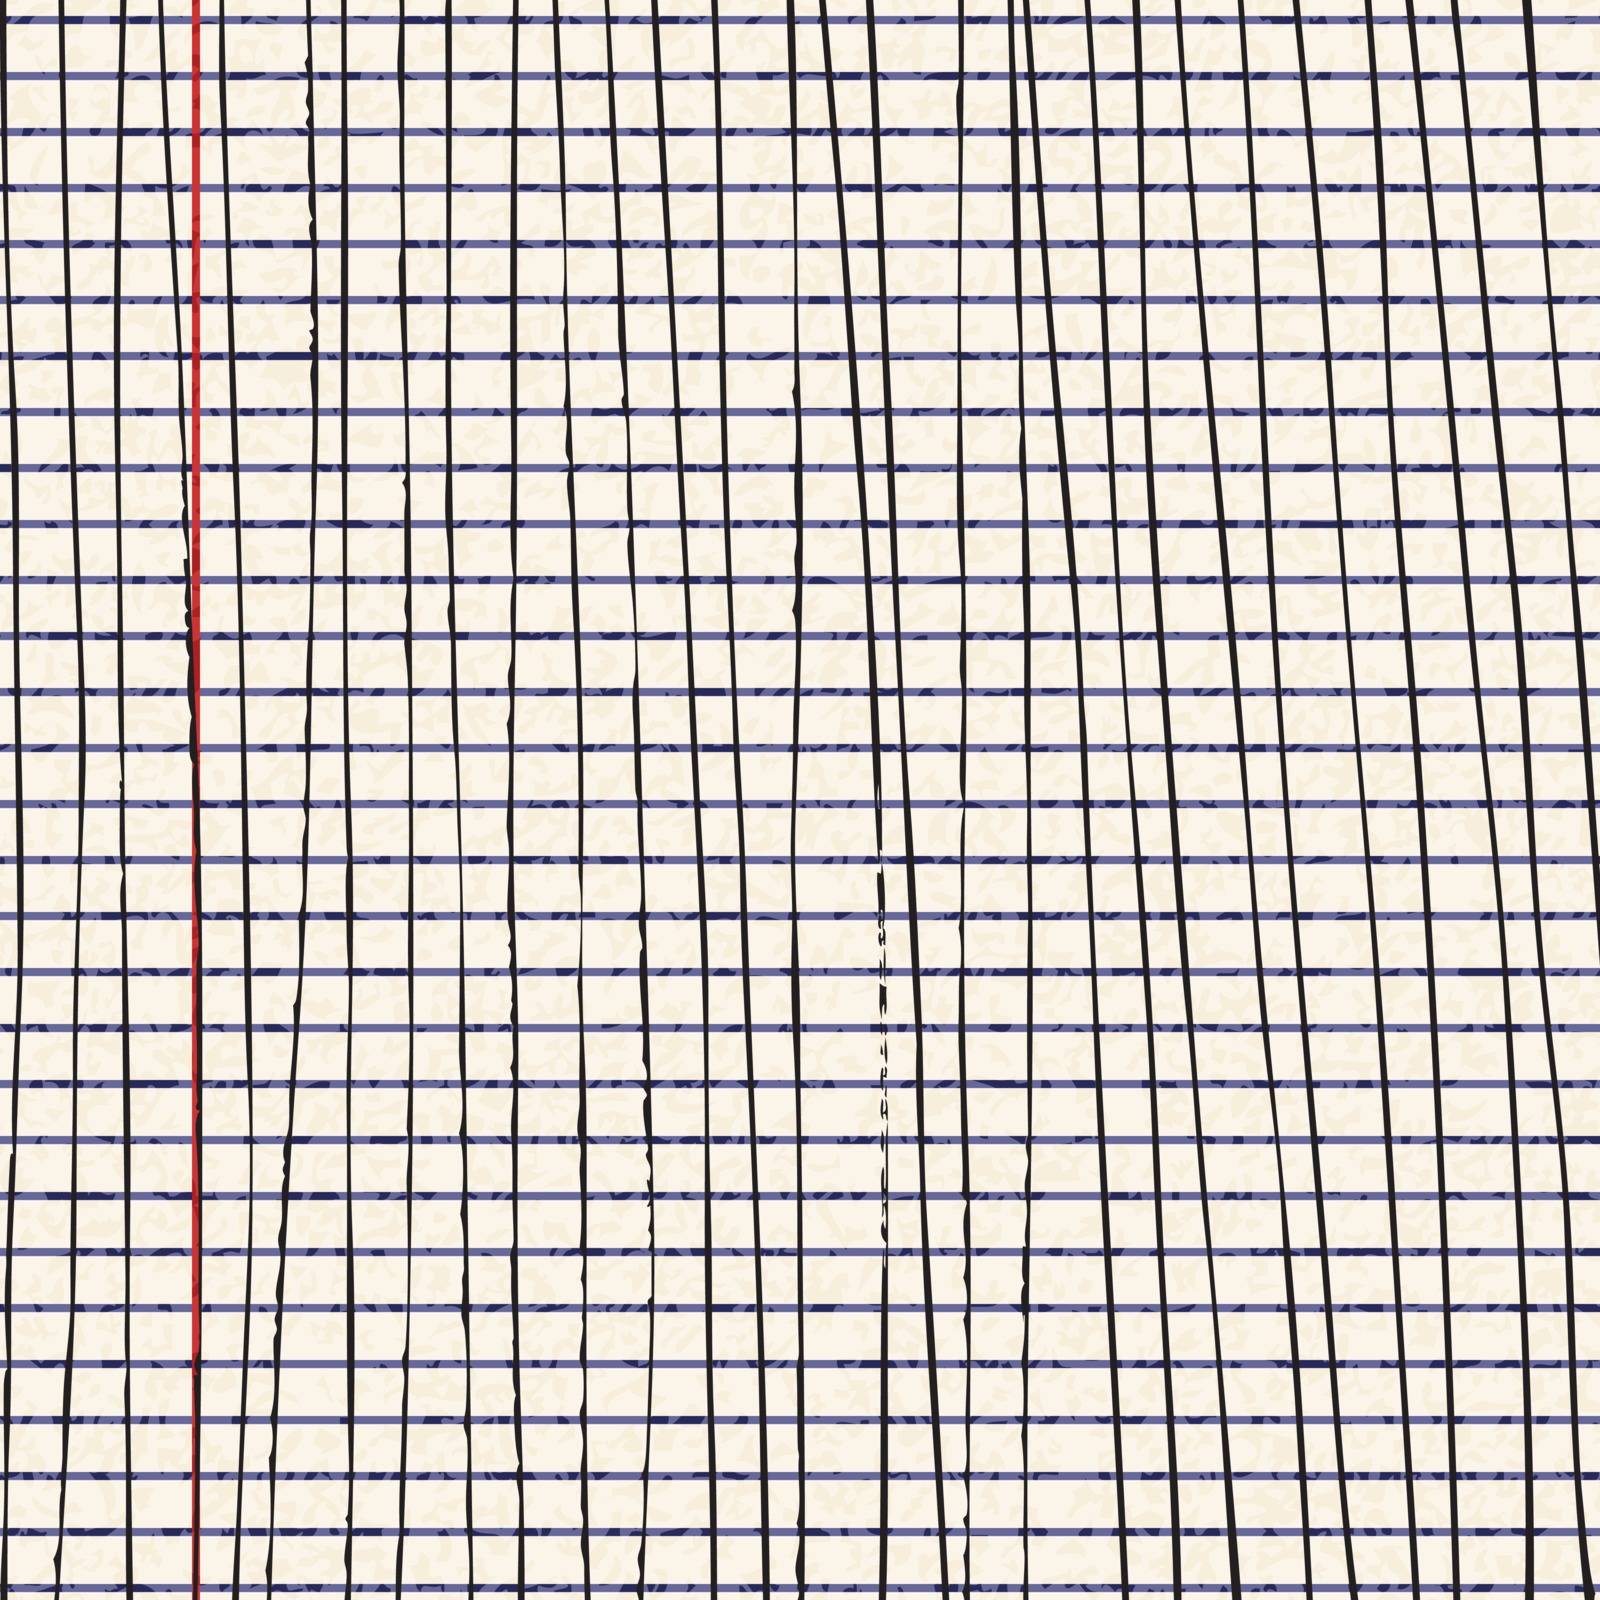 Hand drawn illustration of lines on a sheet of lined paper